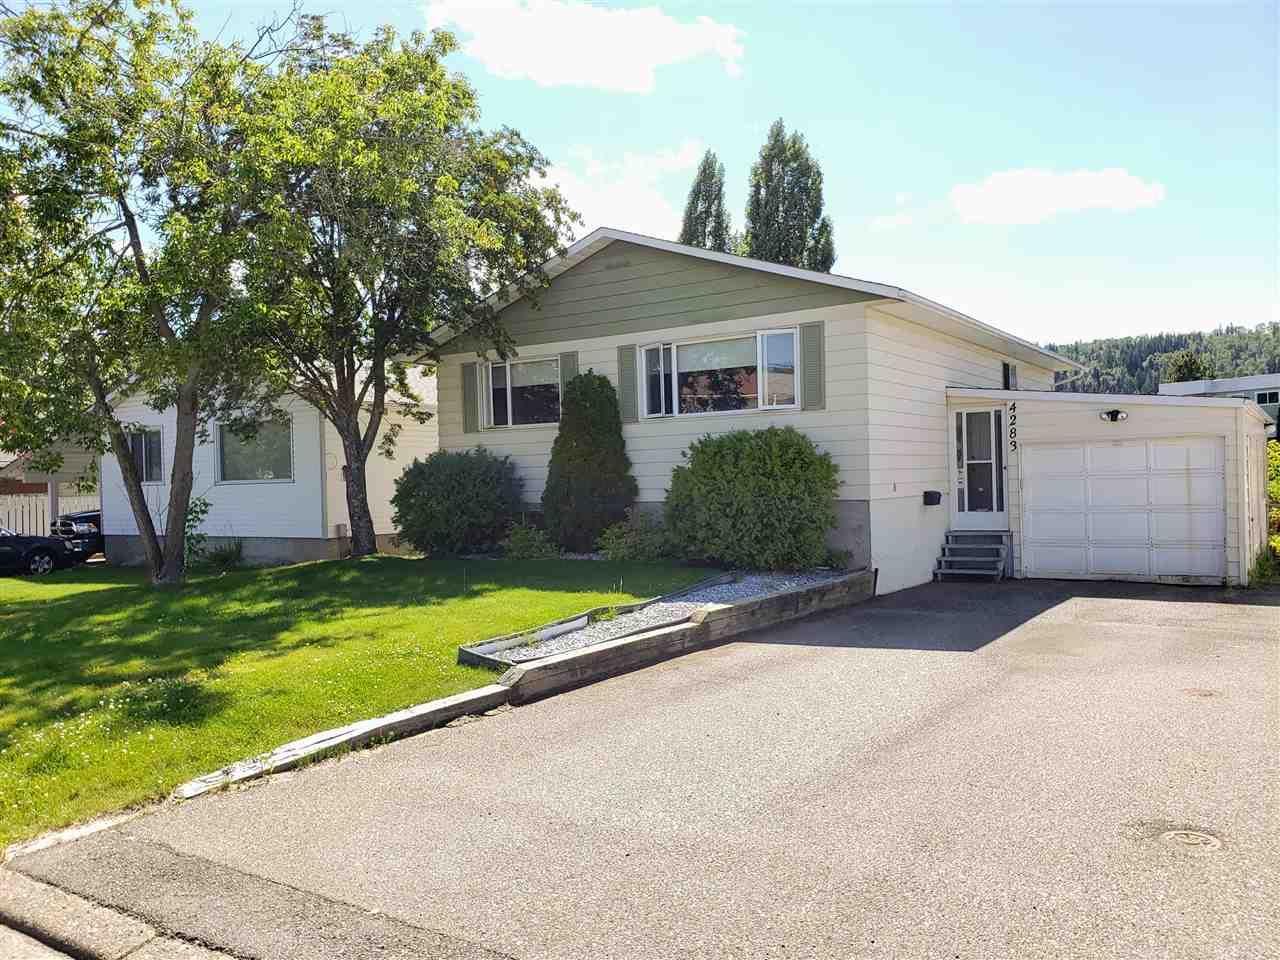 Main Photo: 4283 MERTON Crescent in Prince George: Lakewood House for sale (PG City West (Zone 71))  : MLS®# R2483920